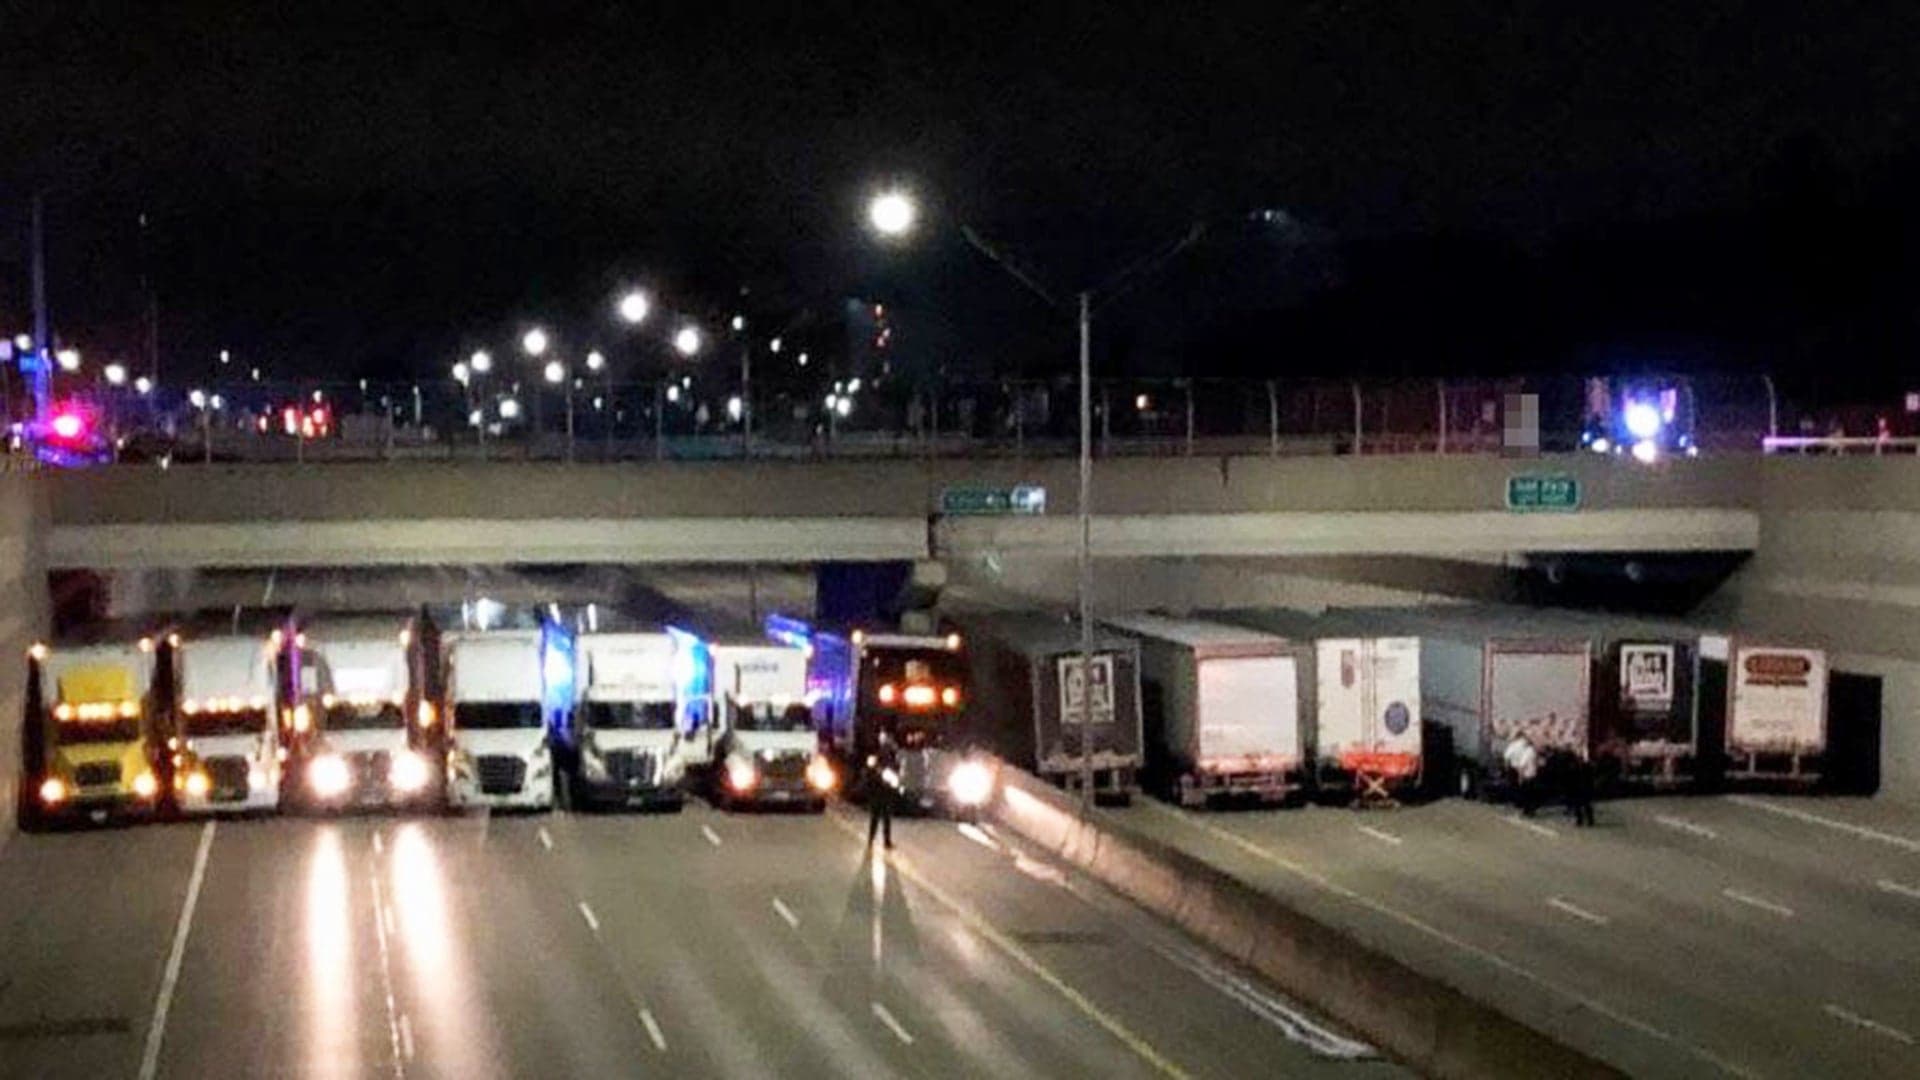 Heroic Truckers Use Their Rigs to Stop Suicidal Man From Jumping Off Bridge